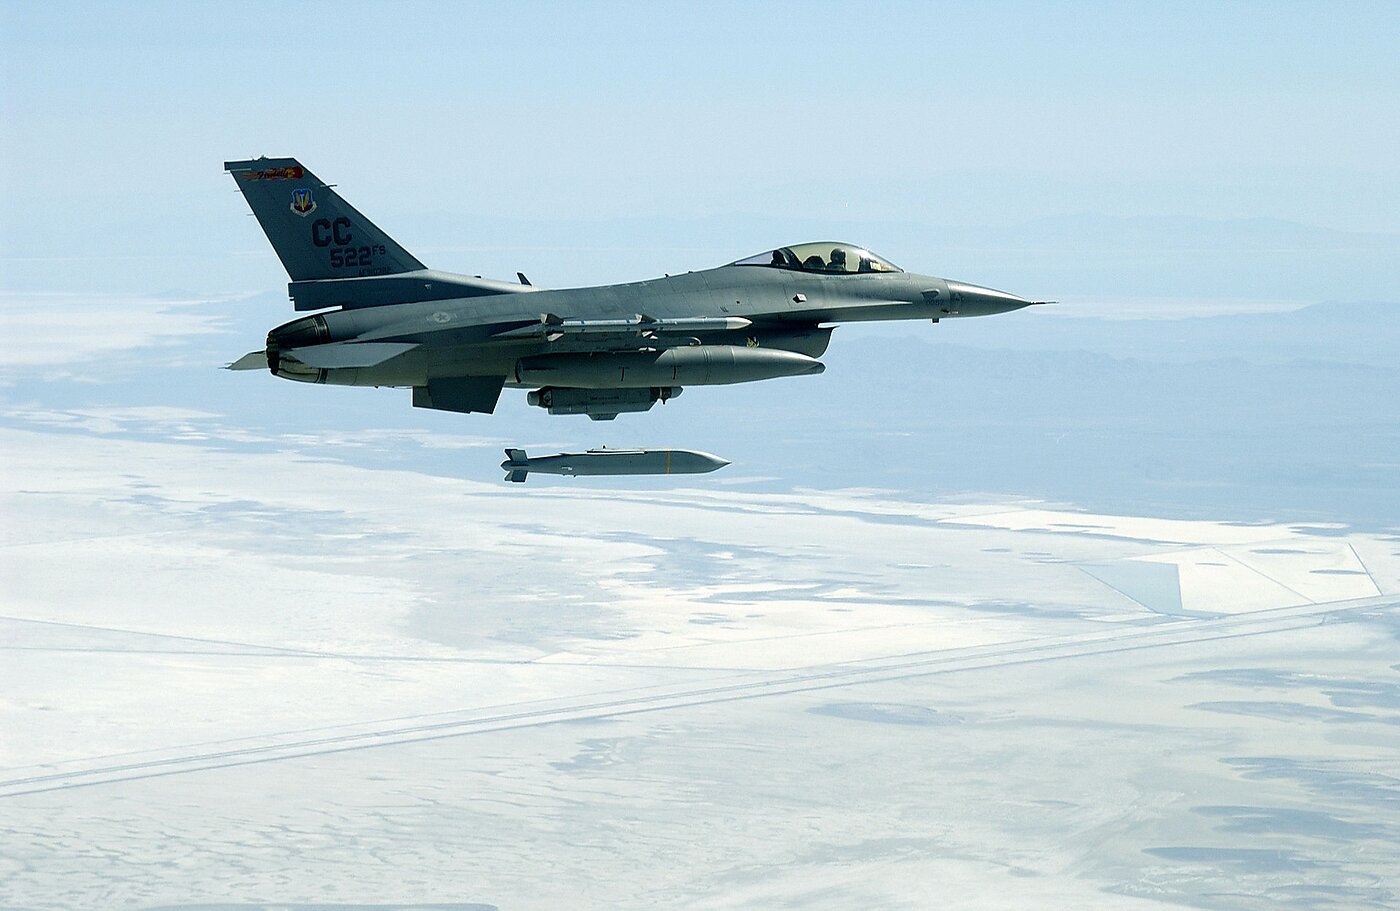 US F-16 Releases AGM-154 JSOW in Weapon Test